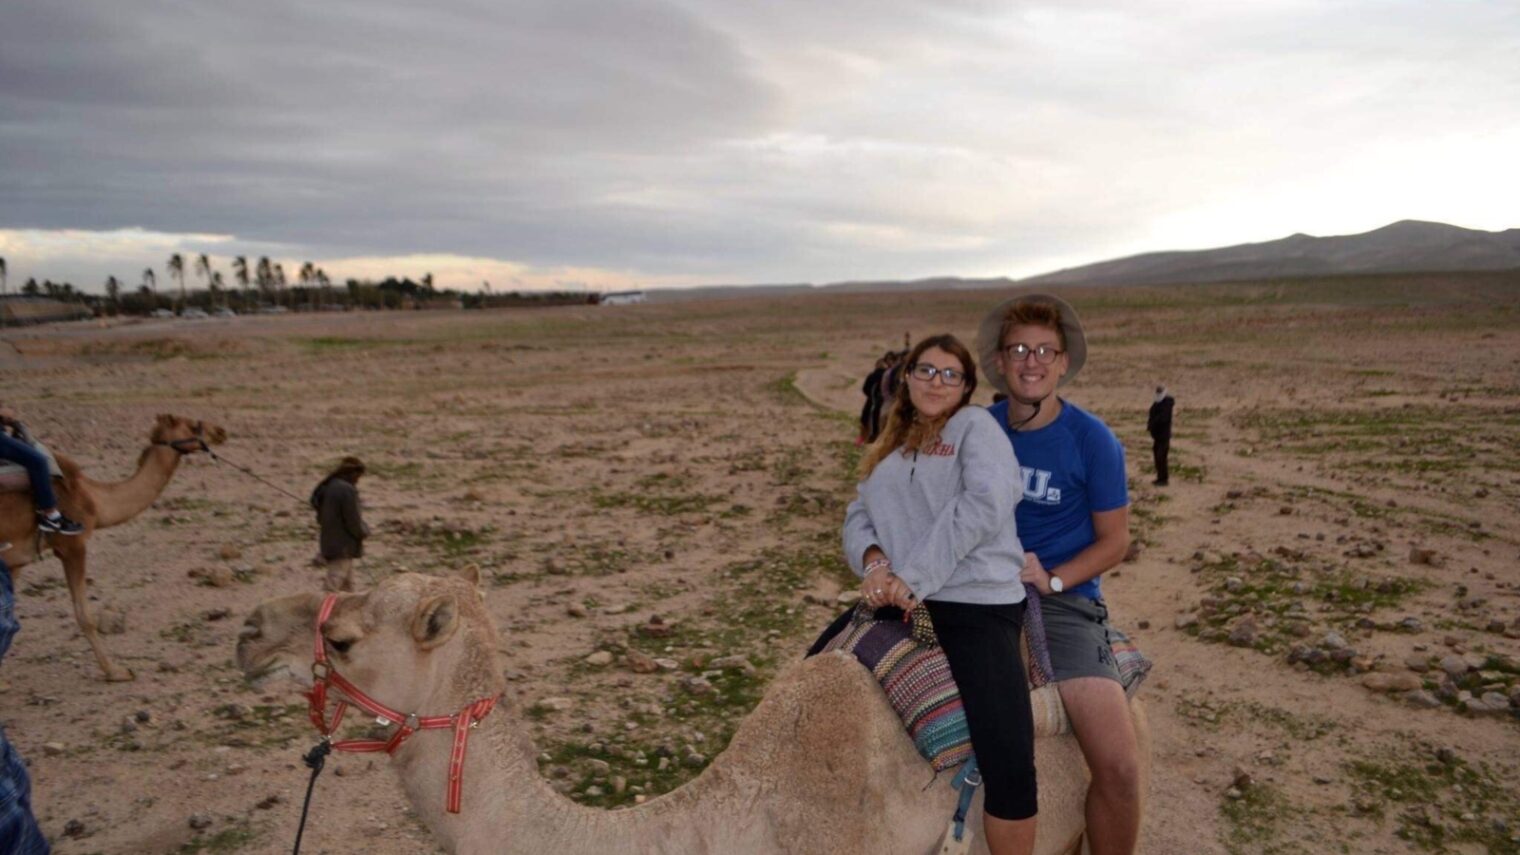 Joey Kirsch and a friend riding a camel in Israel. Photo: courtesy